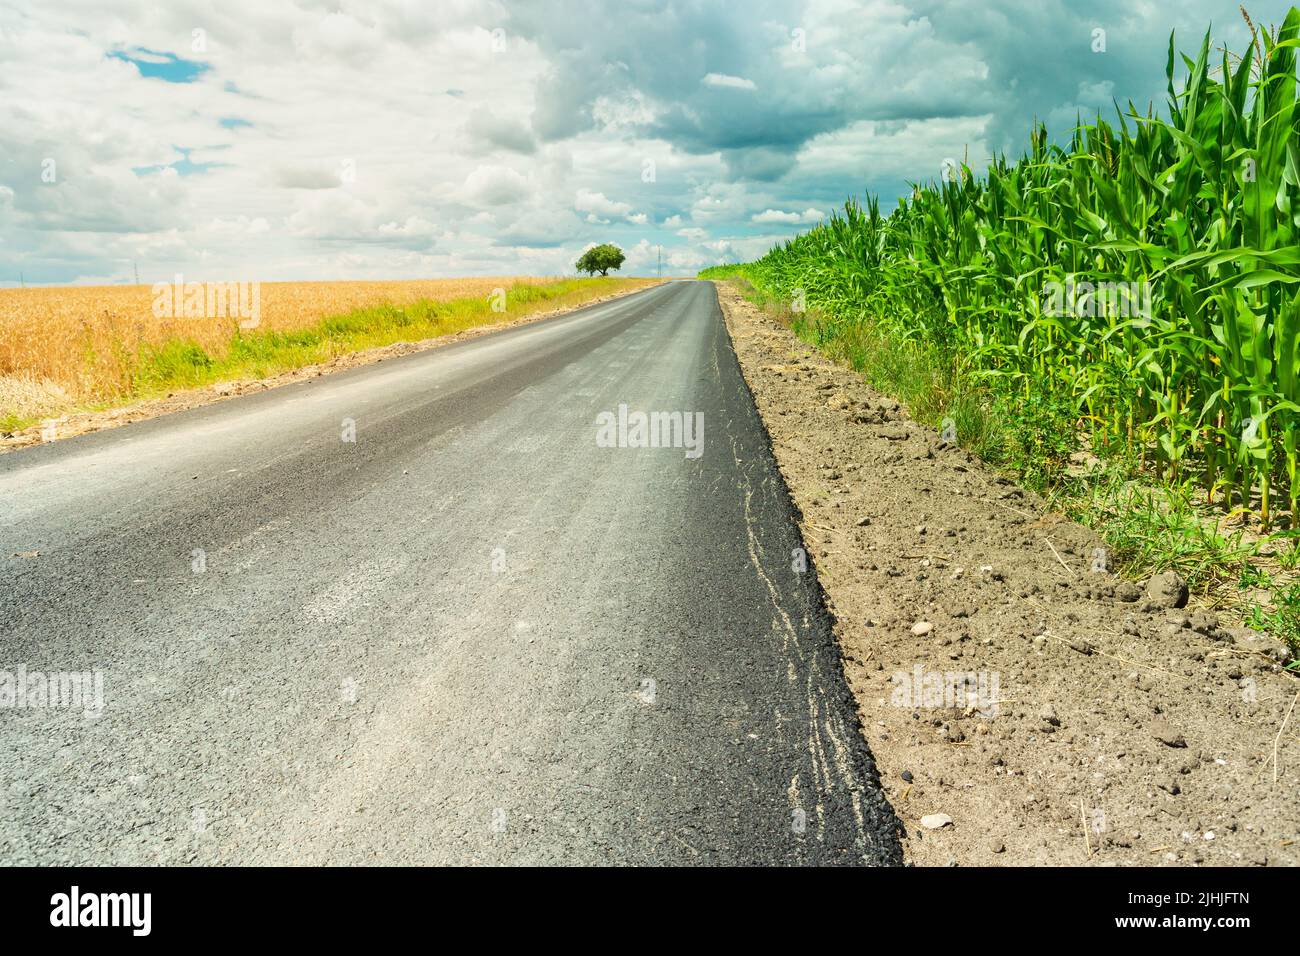 An asphalt road by a green corn field and clouds in the sky Stock Photo